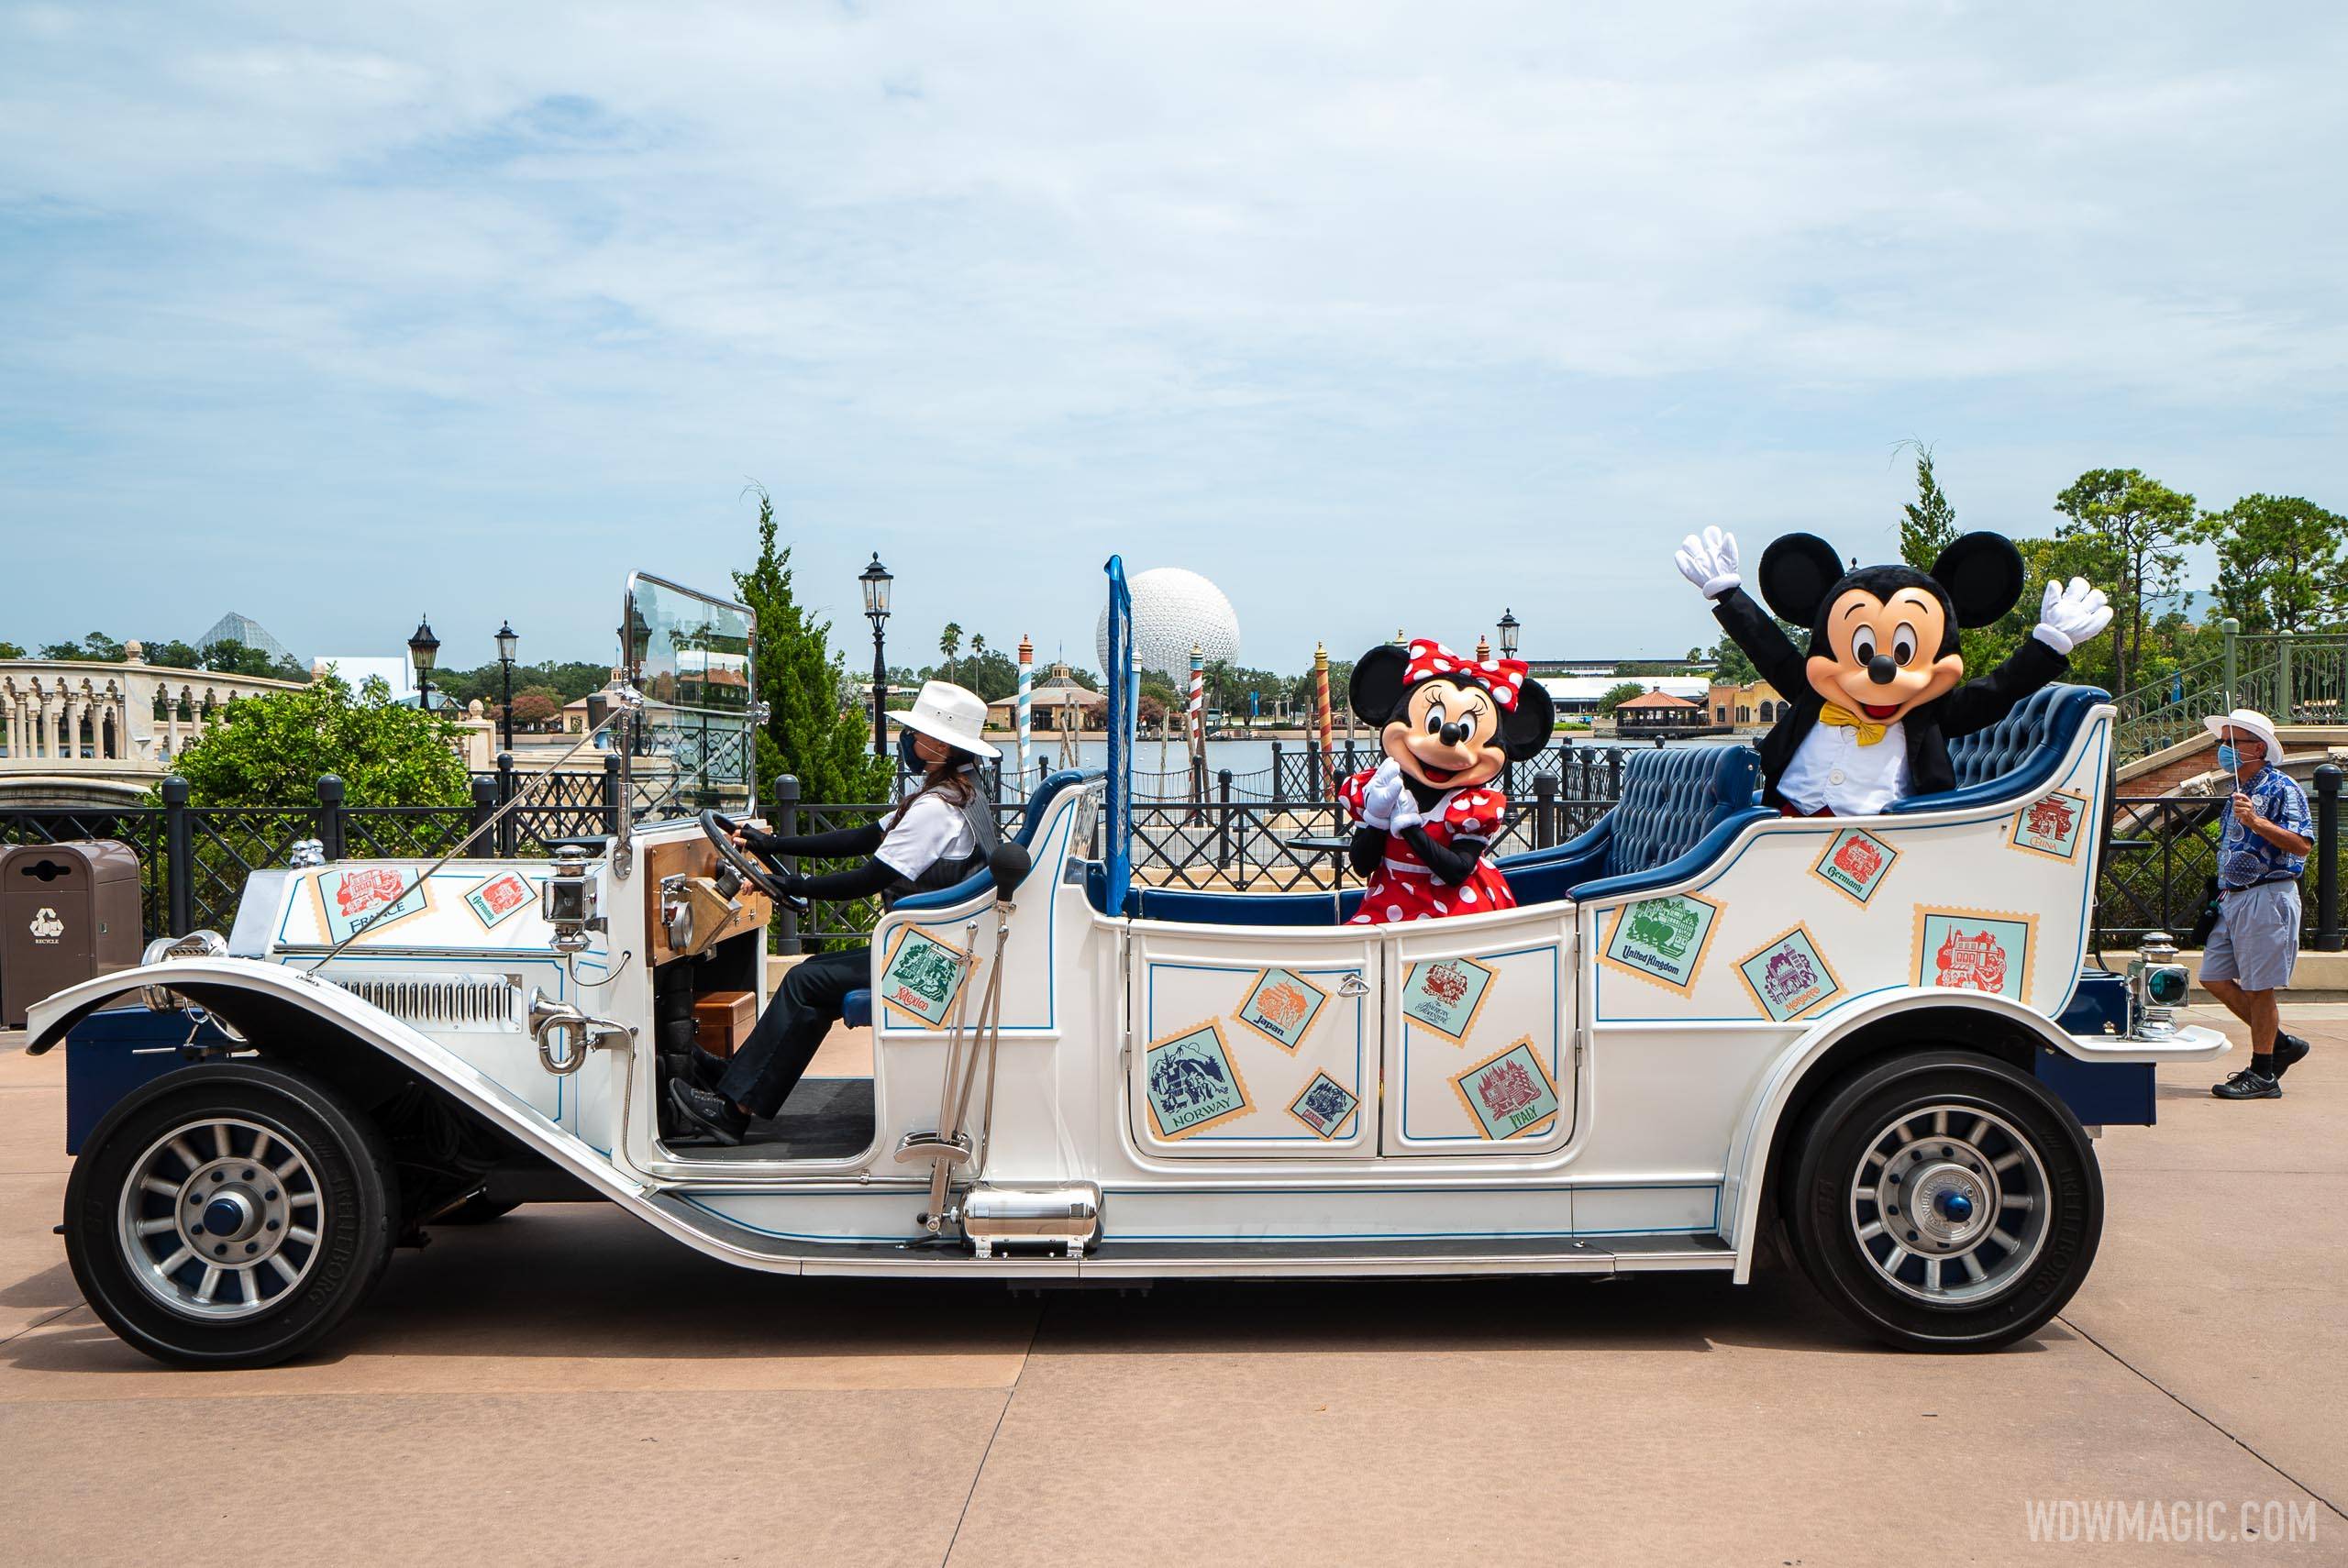 Mickey and Friends World Tour cavalcade coming to an end at EPCOT